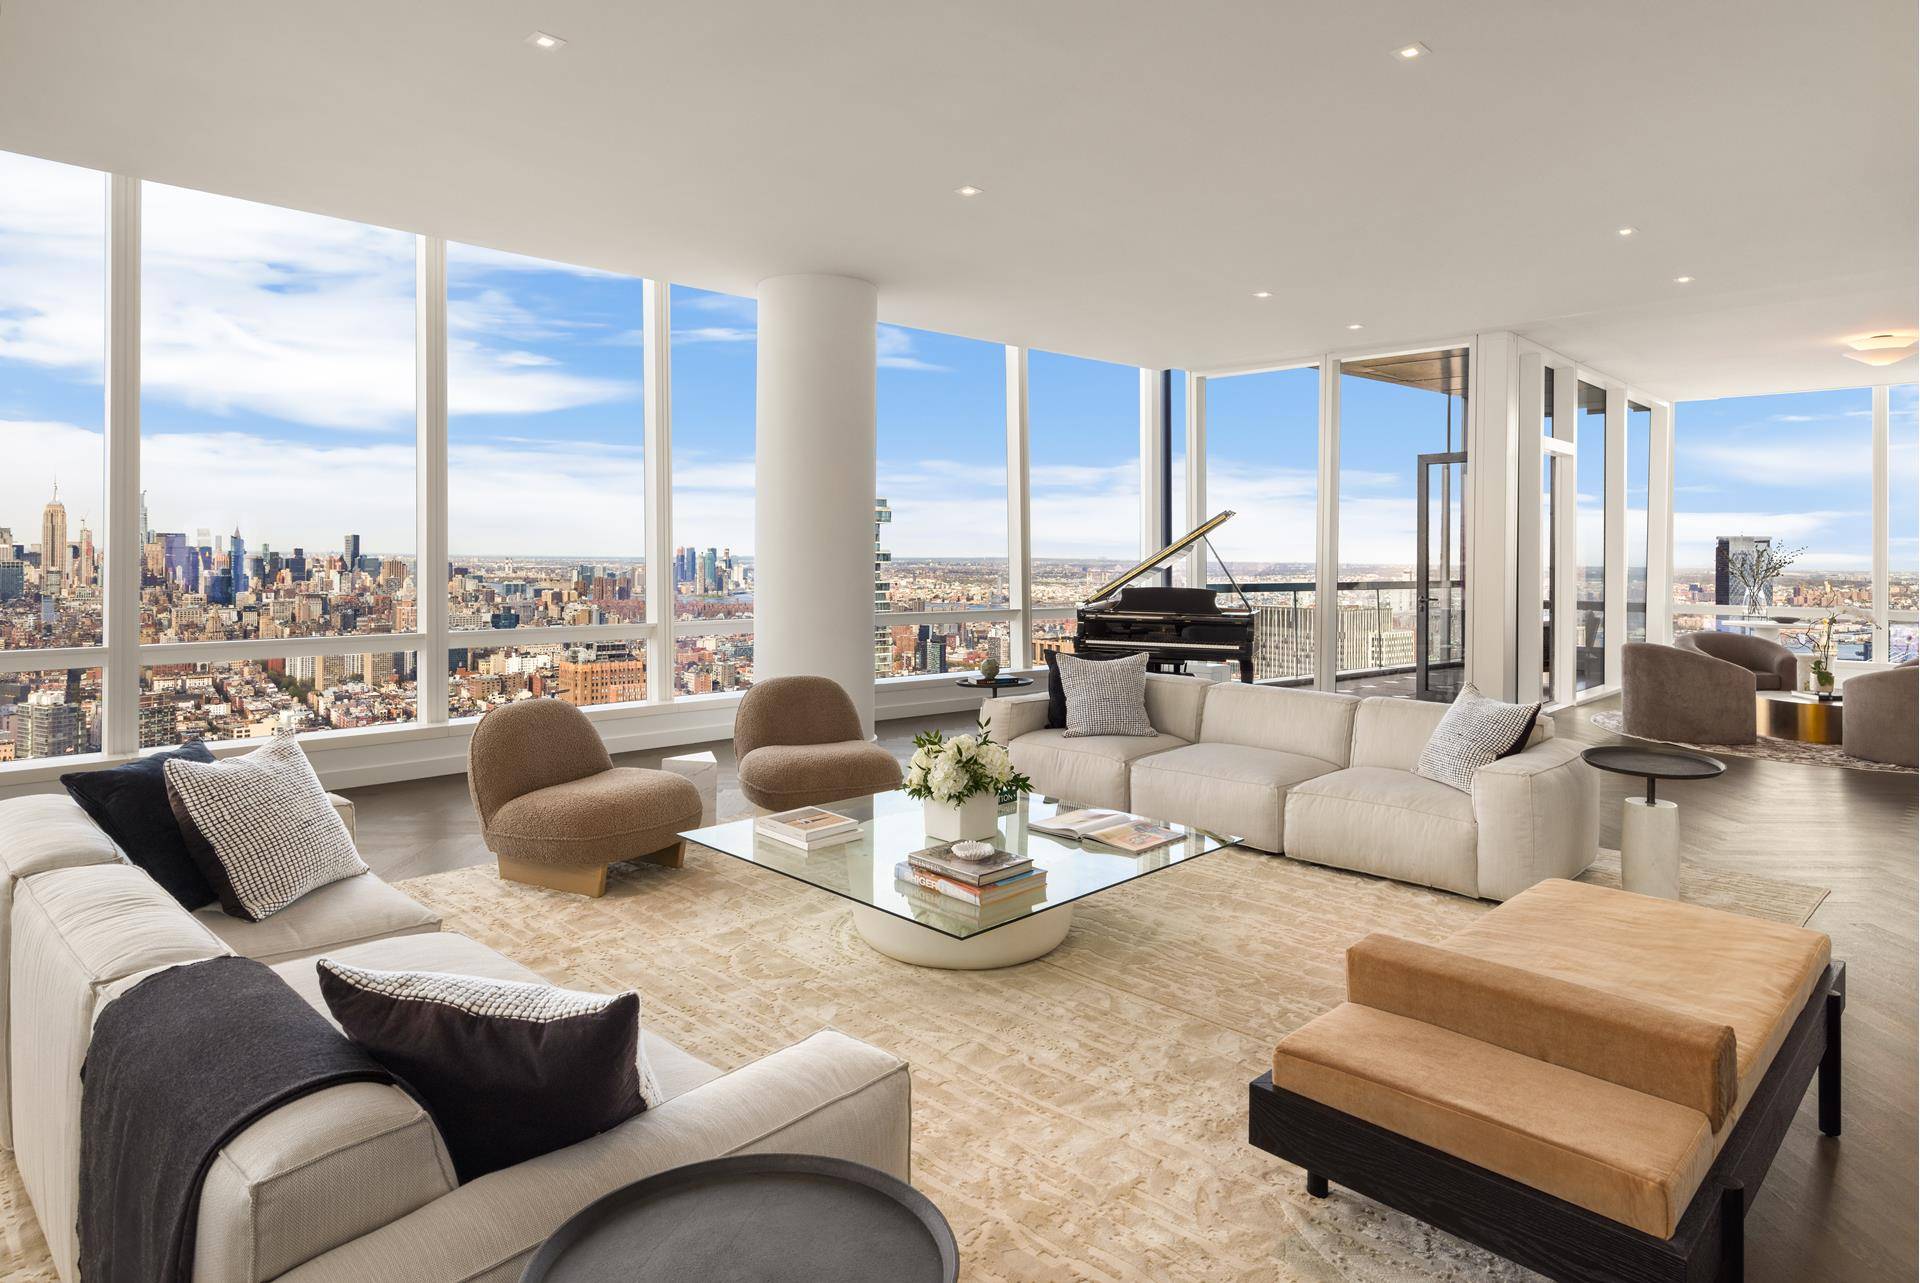 A dream realized, 111 Murray's Penthouse Two is an entirely custom turnkey home unlike any other, meticulously designed by David Mann atop one of the most highly regarded residential developments ...